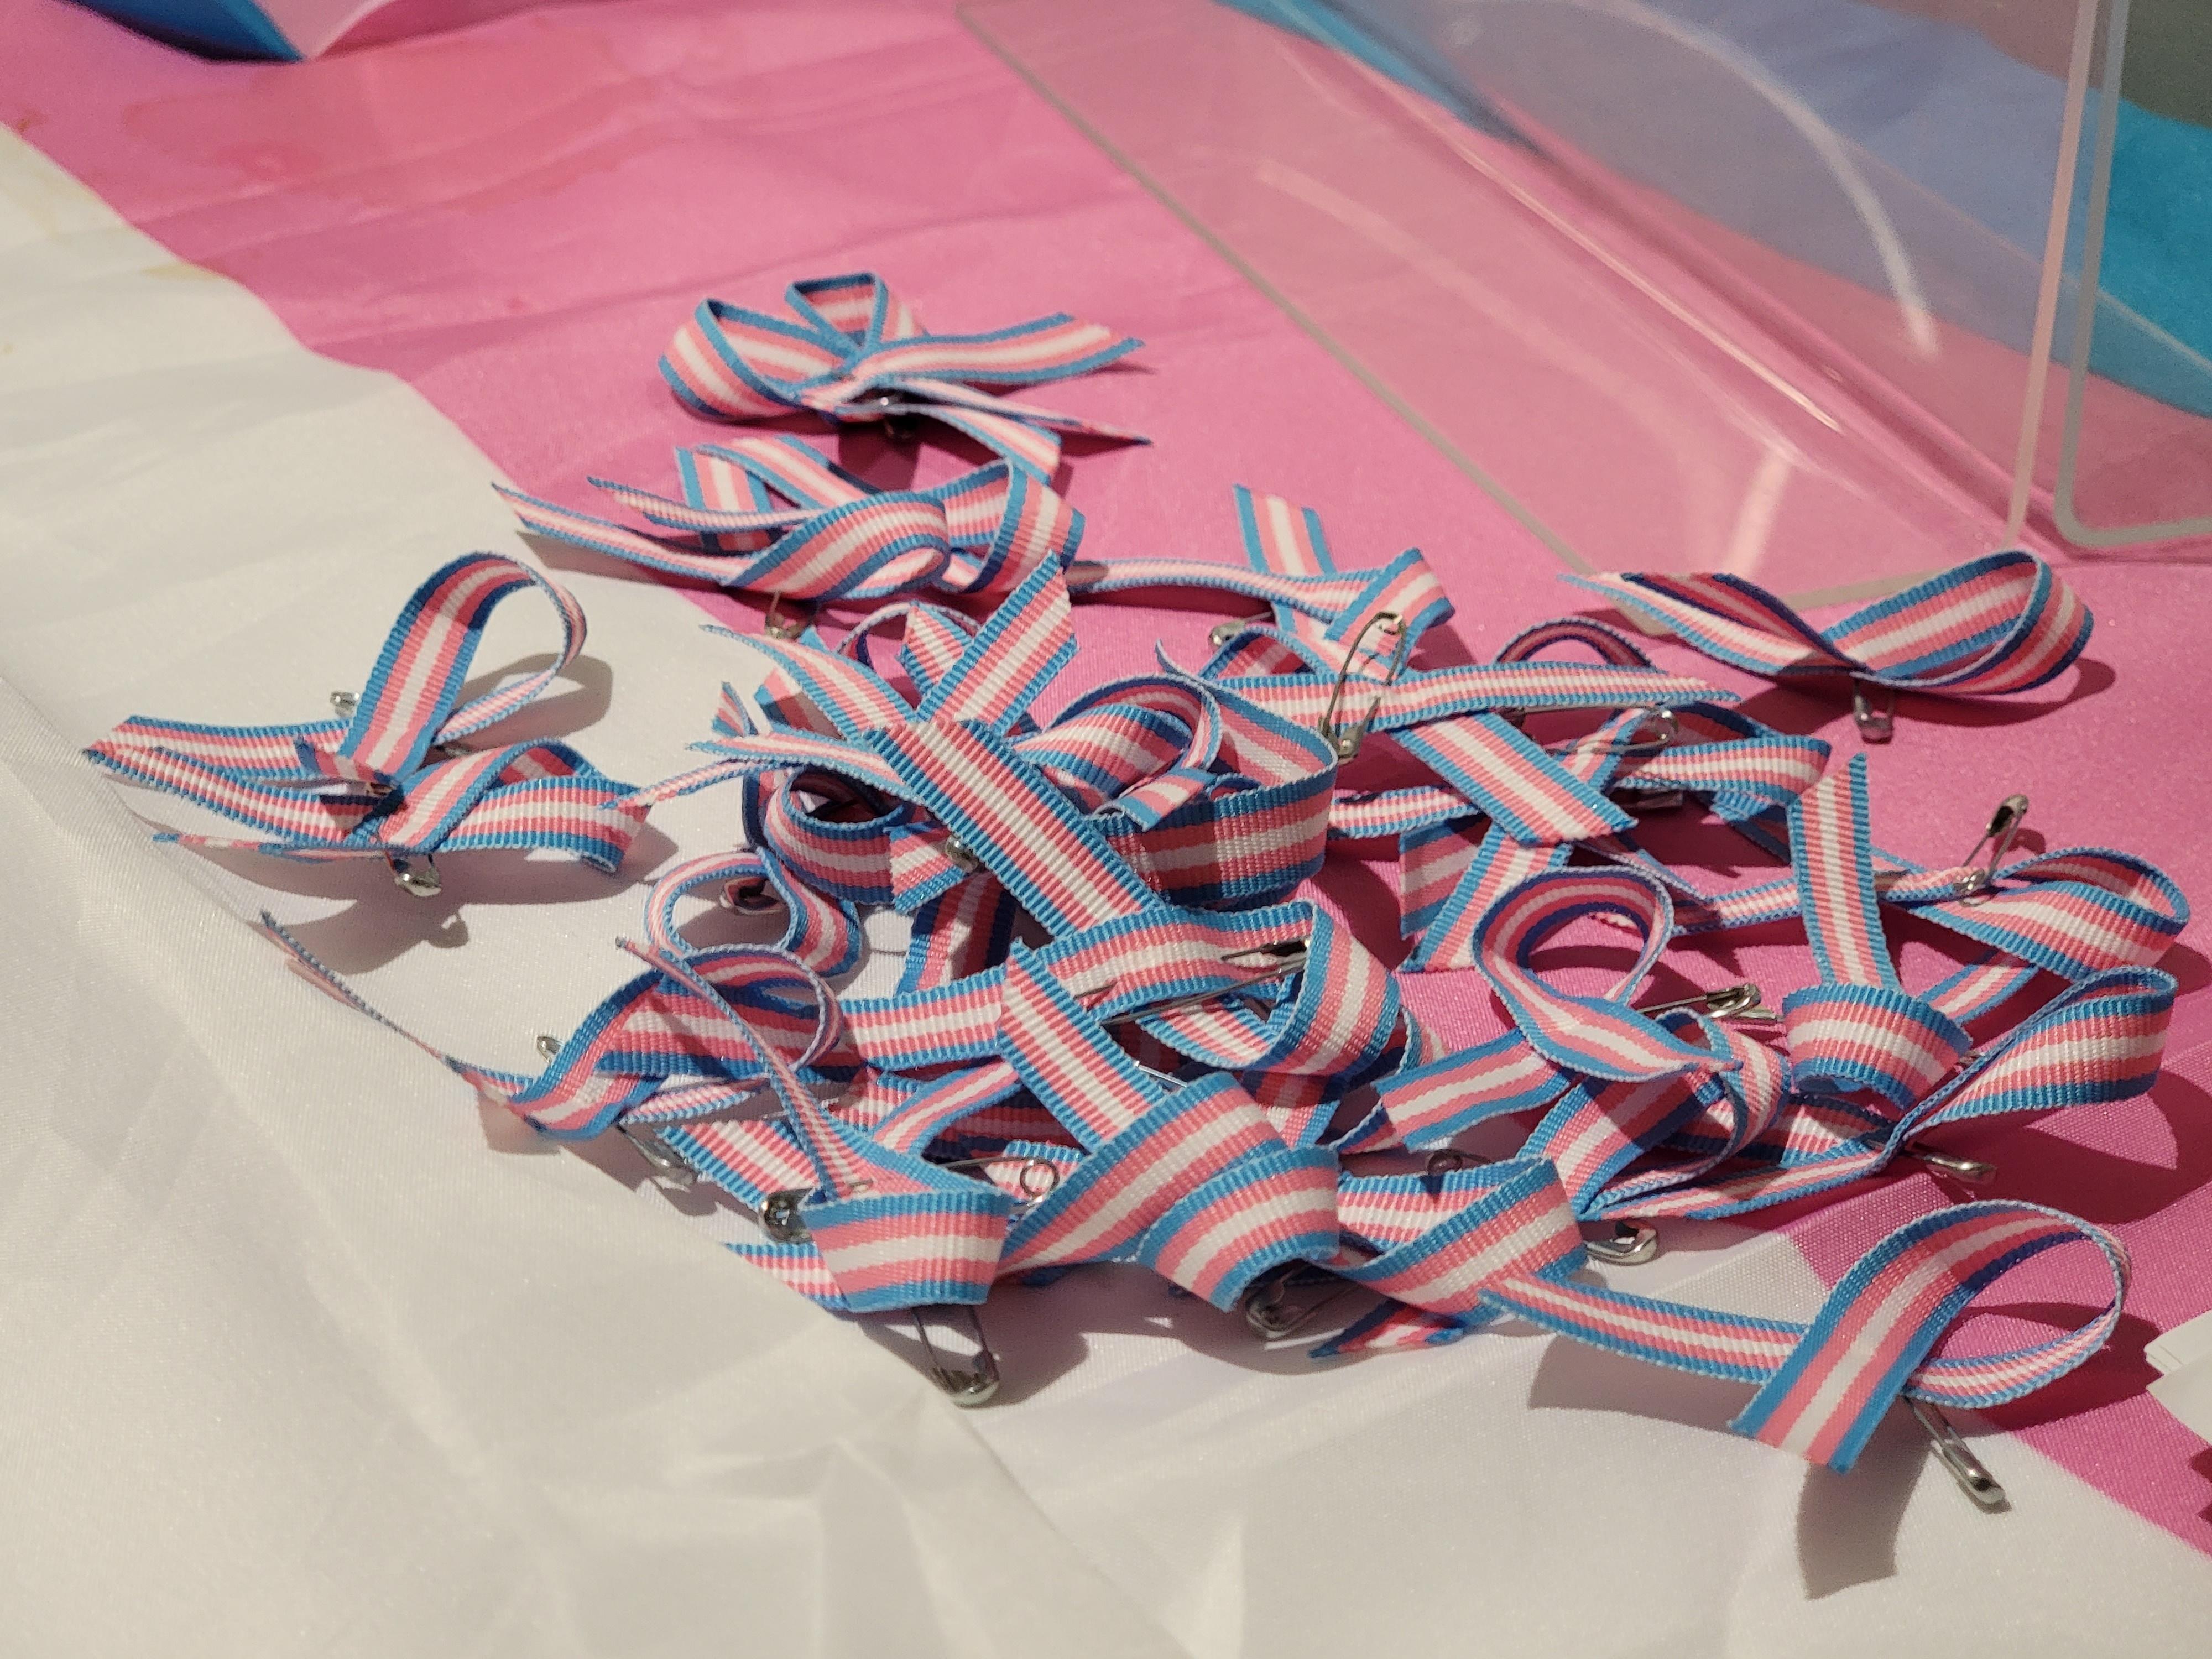 A collection of trans pride ribbons sit on a table at the 2021 Trans Day of Remembrance event